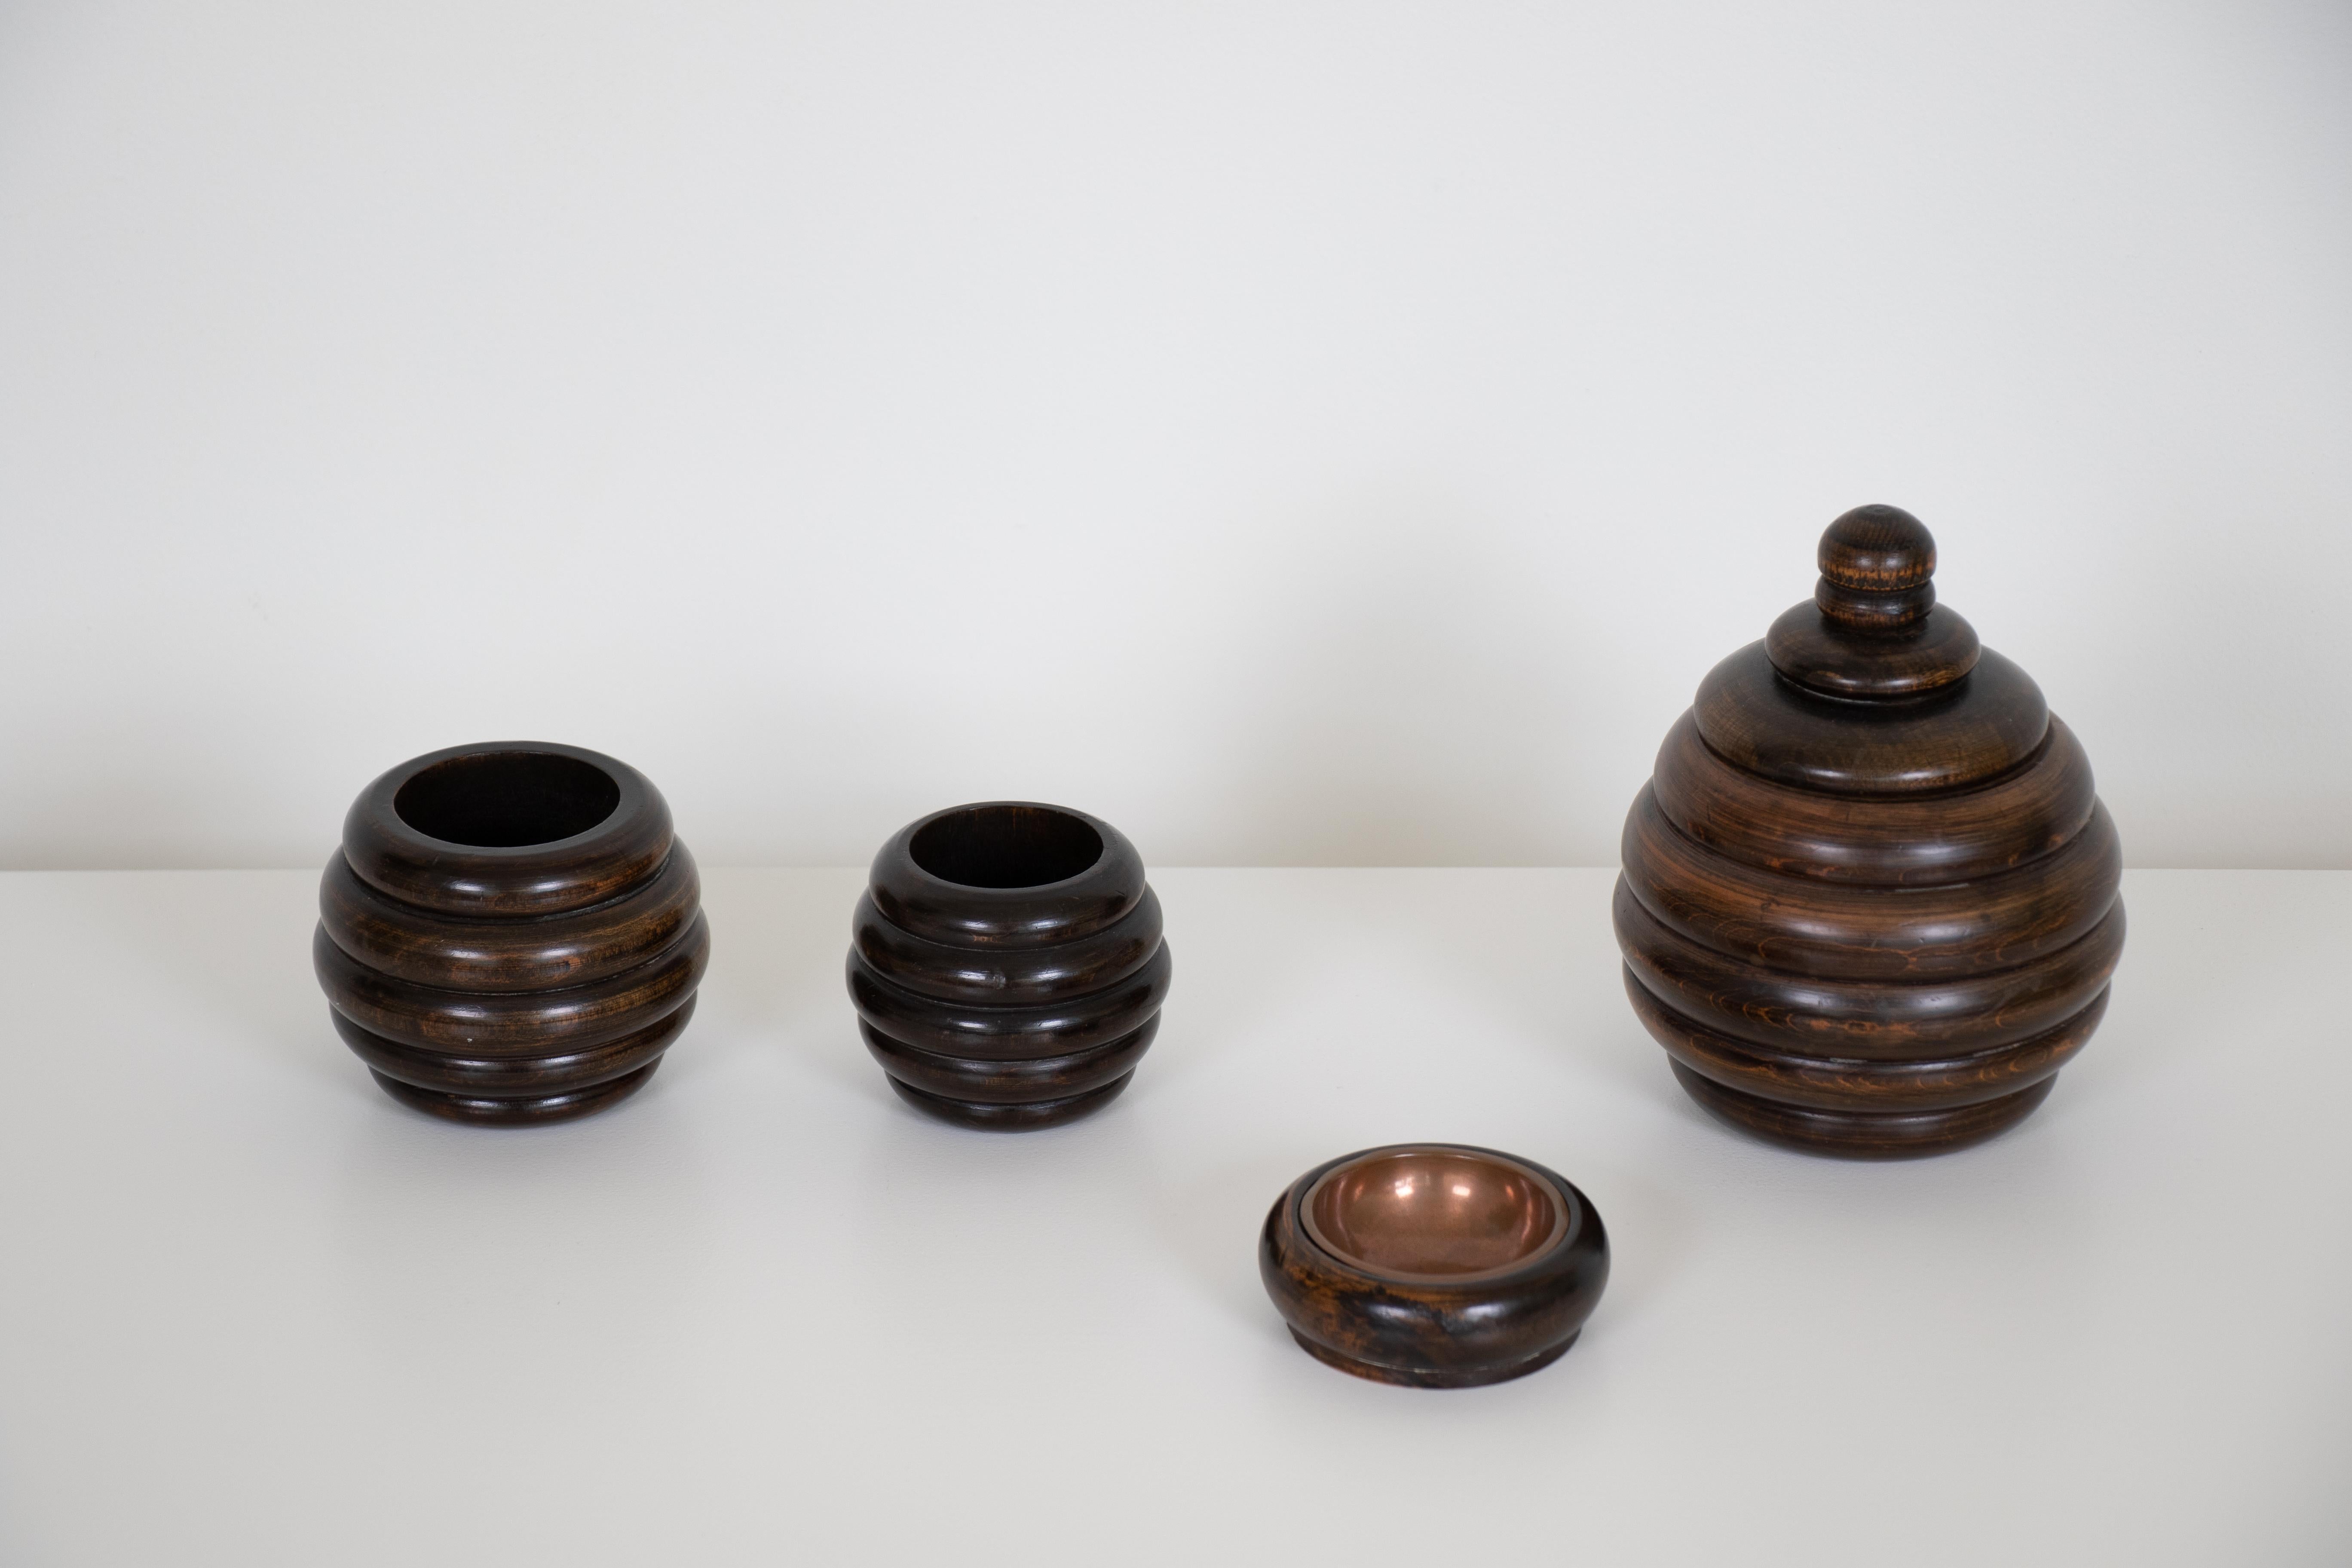 Four-piece set of smoking accessories made of dark oakwood from France. Set consists of two open pots, one larger pot with lid, and one small ashtray/ dish. Could also be used as desk, shelf, or coffee table accessories.

Measures: Large pot with